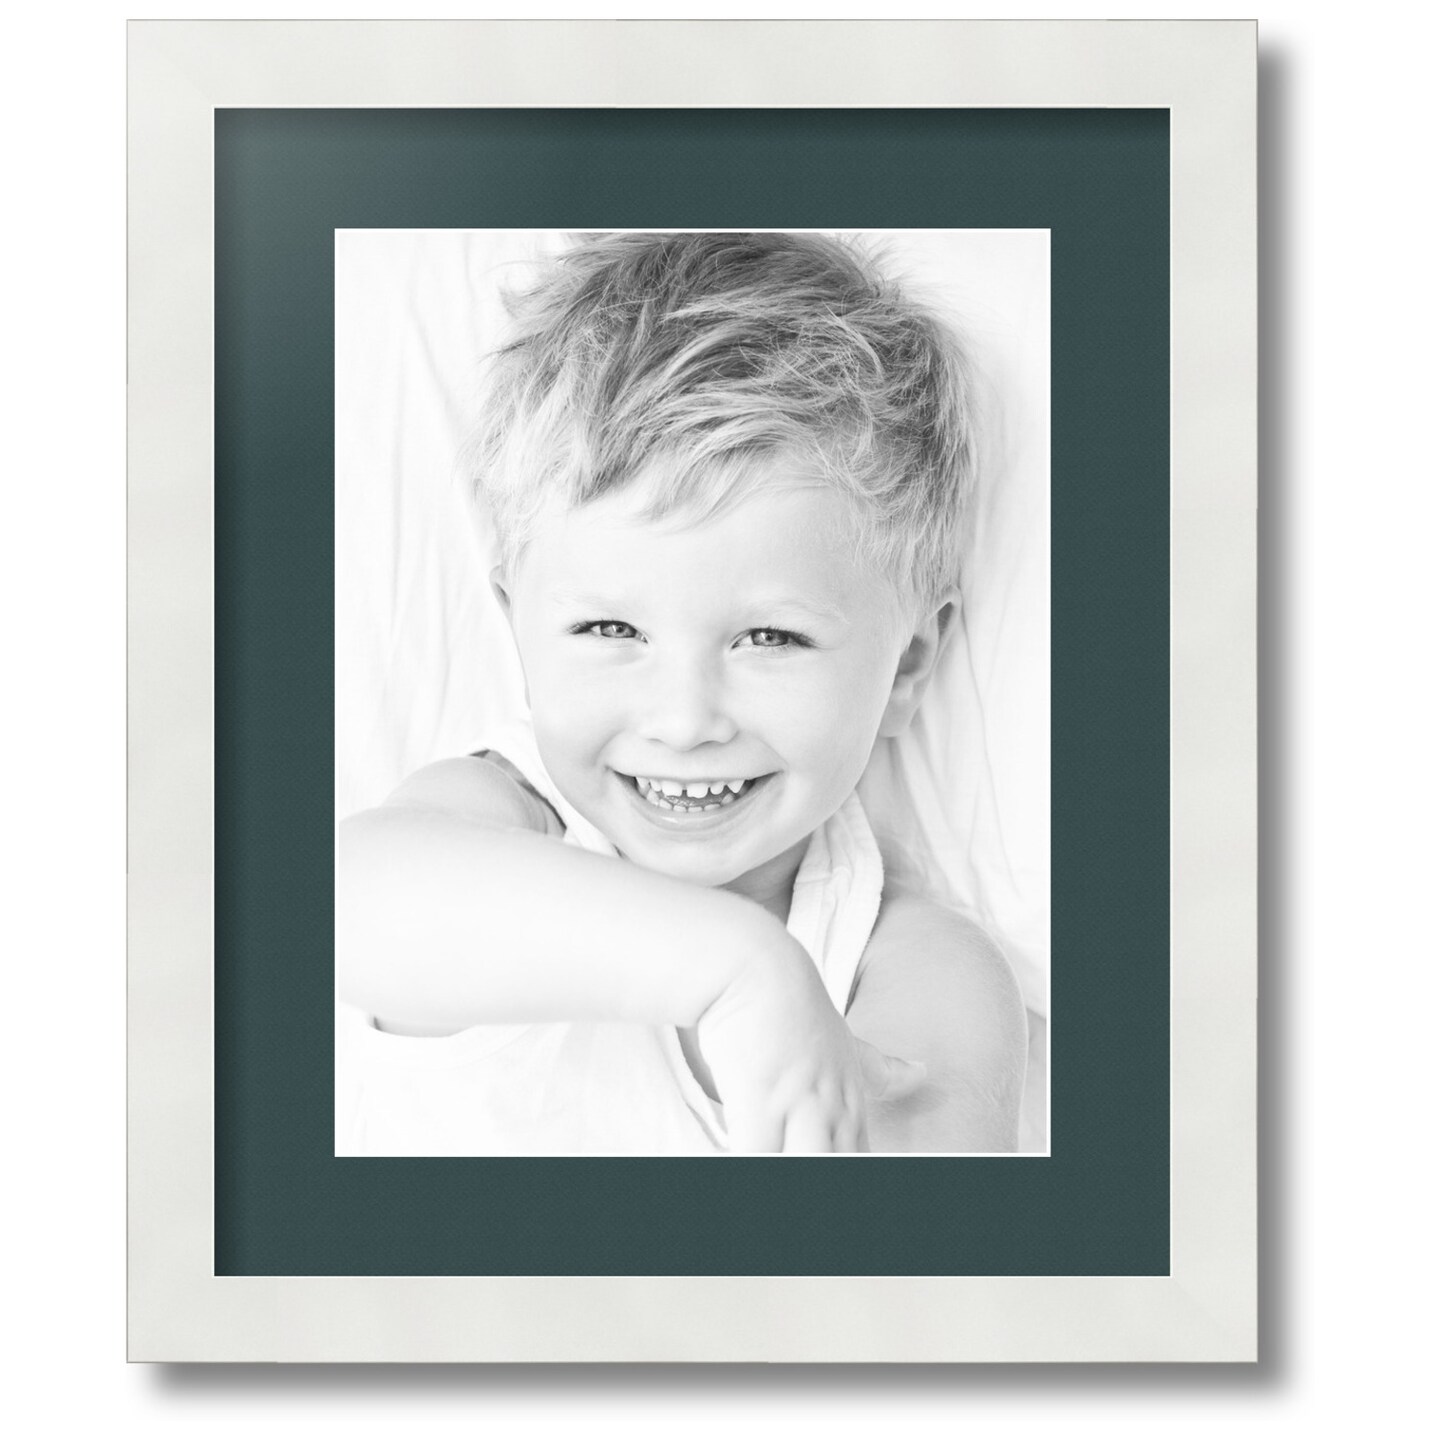 ArtToFrames Collage Photo Picture Frame with 1 - 10x13 inch Openings, Framed in White with Over 62 Mat Color Options and Regular Glass (CSM-3966-641)